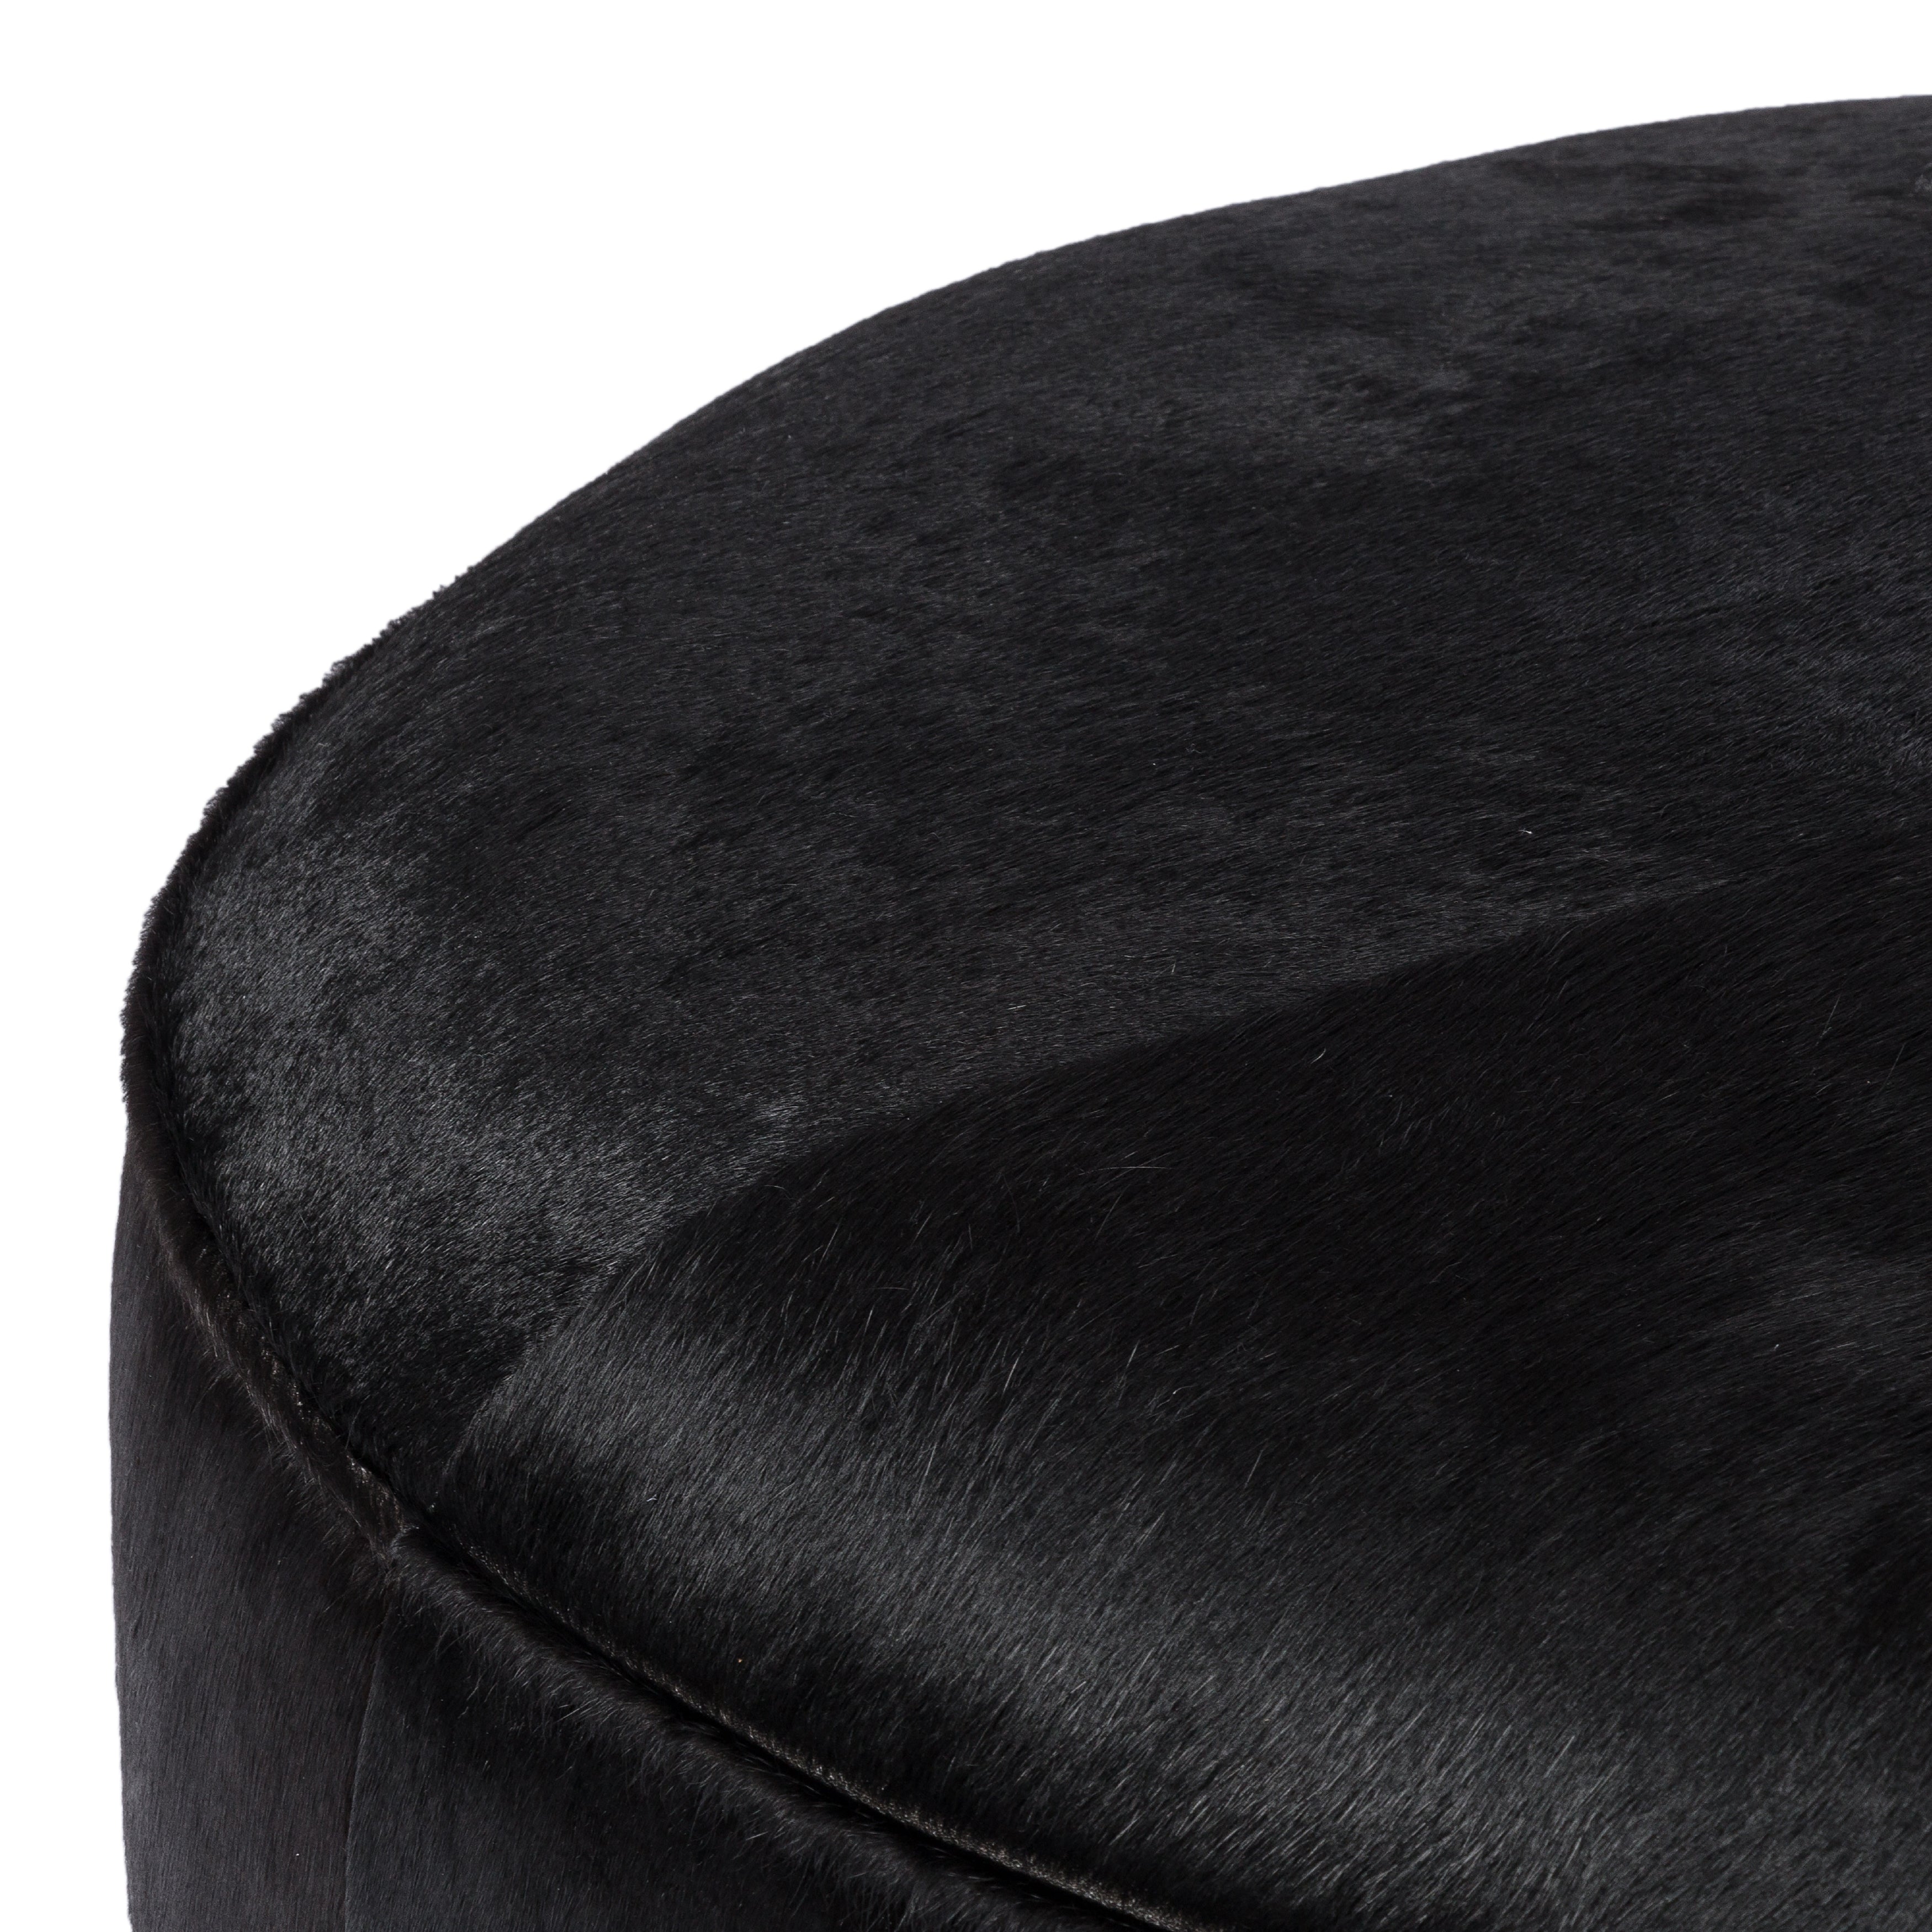 This large, round ottoman of textural hair-on hide brings with it a hip retro vibe as a coffee table or extra seating.  Covered in soft and luminous black hair-on hide, which is naturally warm and textural with authentic highlights. Amethyst Home provides interior design, new construction, custom furniture, and area rugs in the Des Moines metro area.